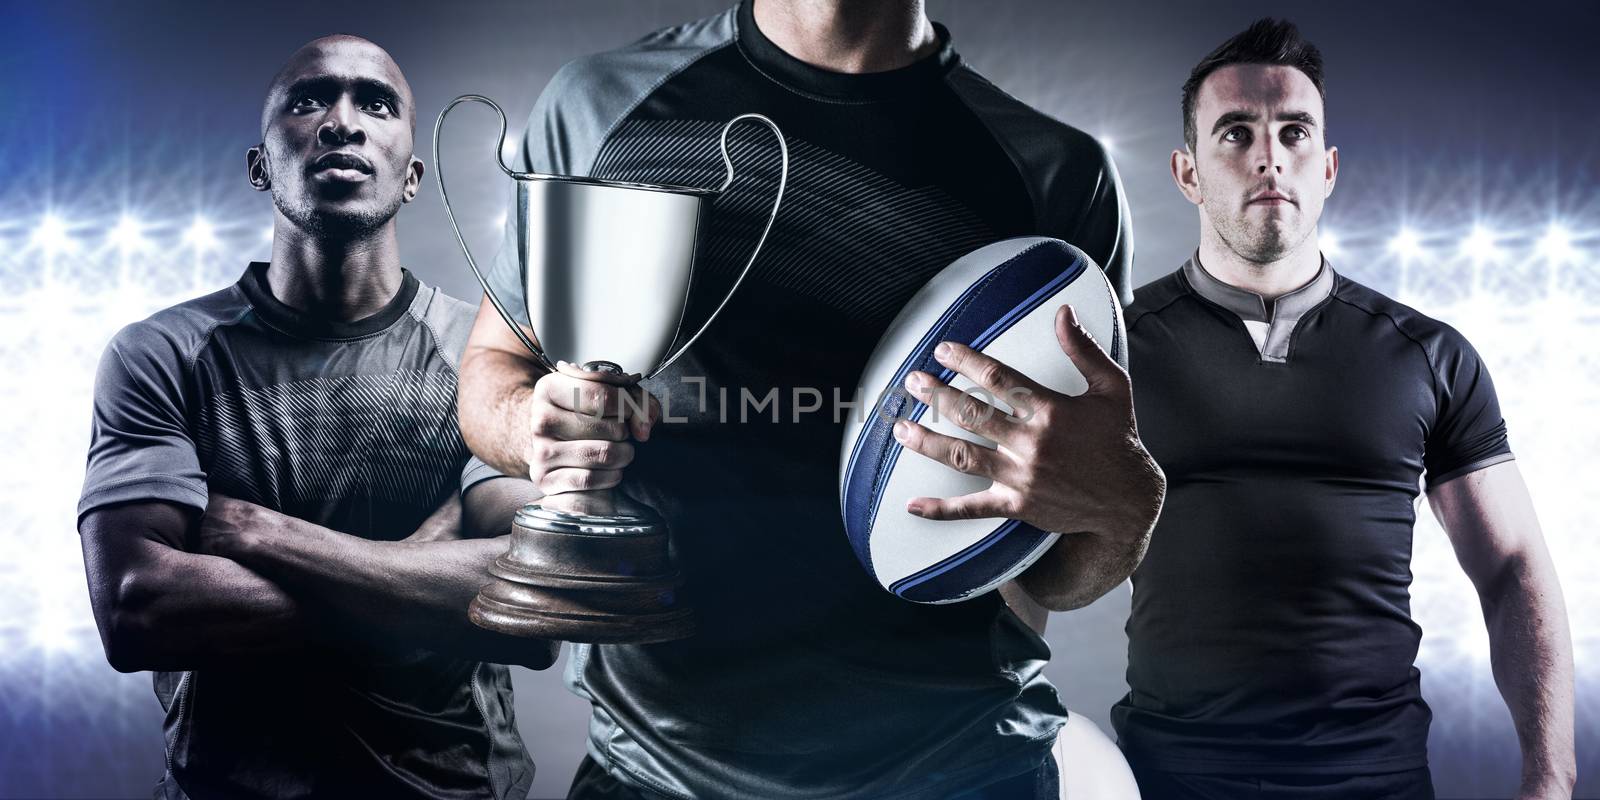 Midsection of successful rugby player holding trophy and ball against spotlight